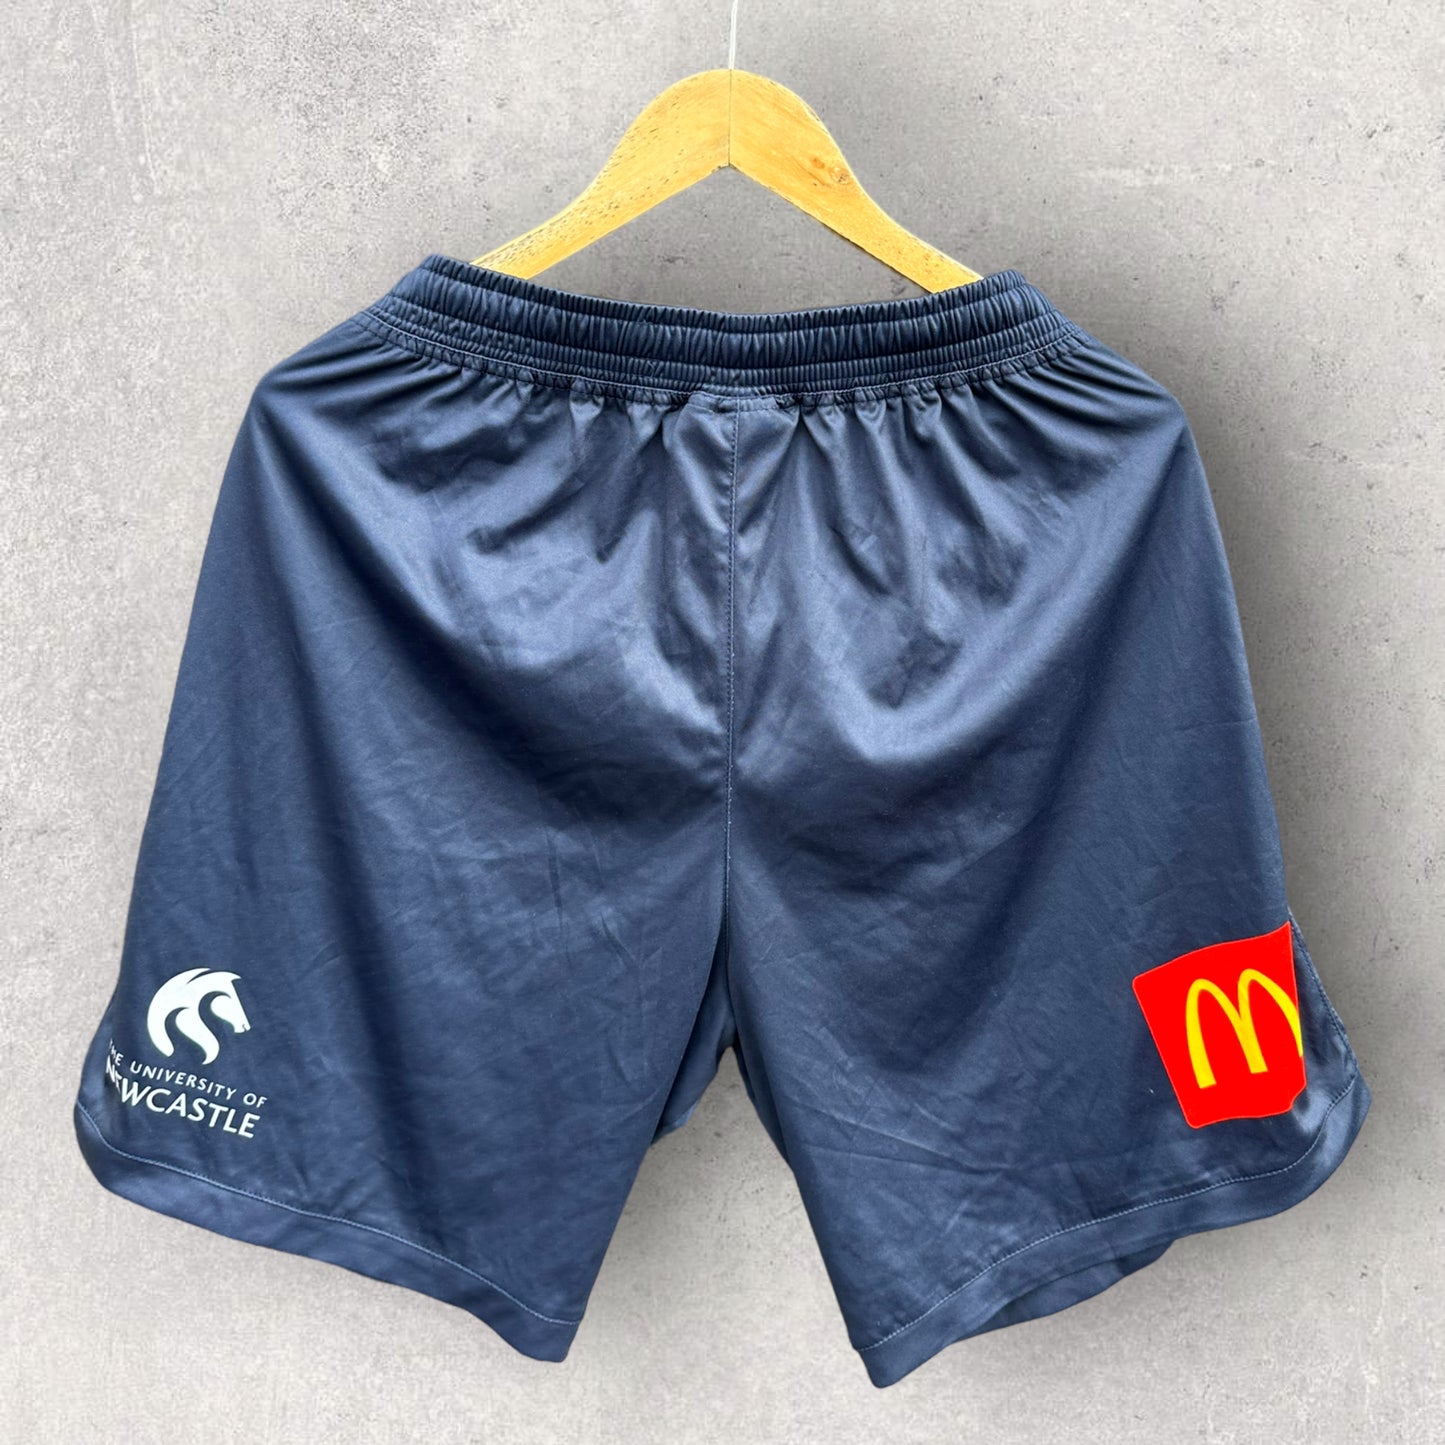 CENTRAL COAST MARINERS PLAYER ISSUED TRAINING SHORTS